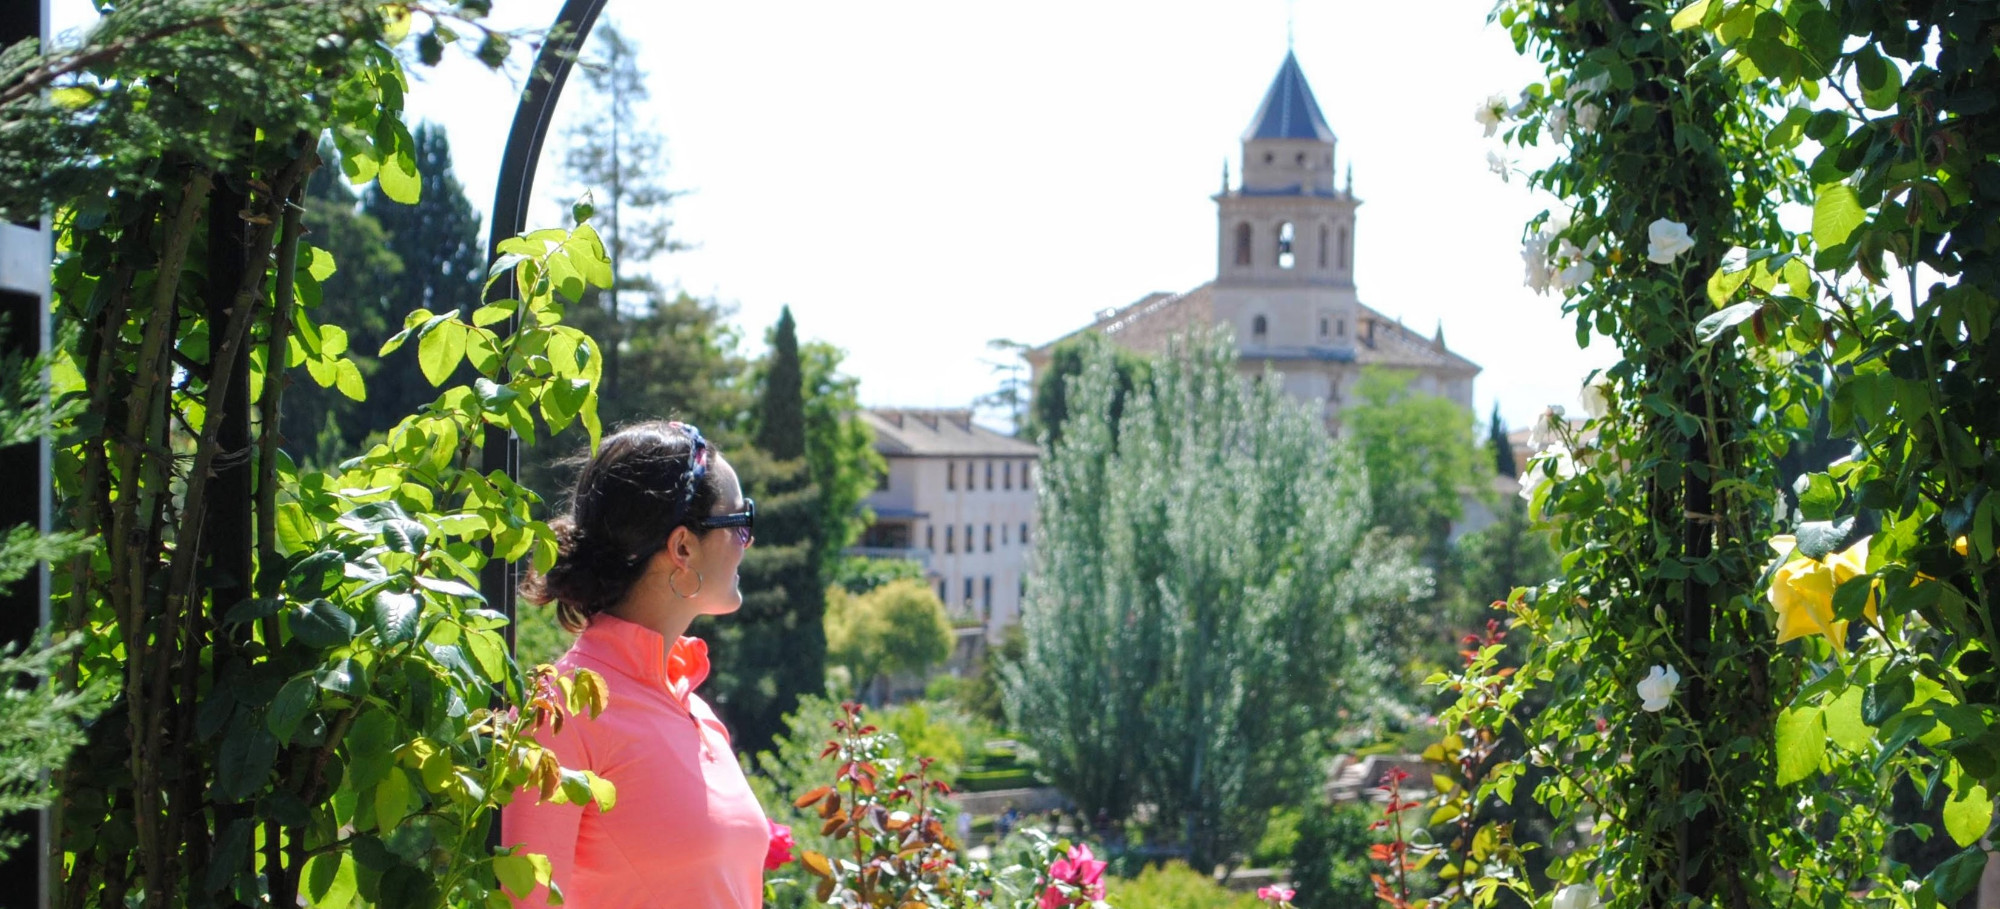 Boise travel agent, Jennifer Lowry, enjoys the views of the Alhambra from the garden.